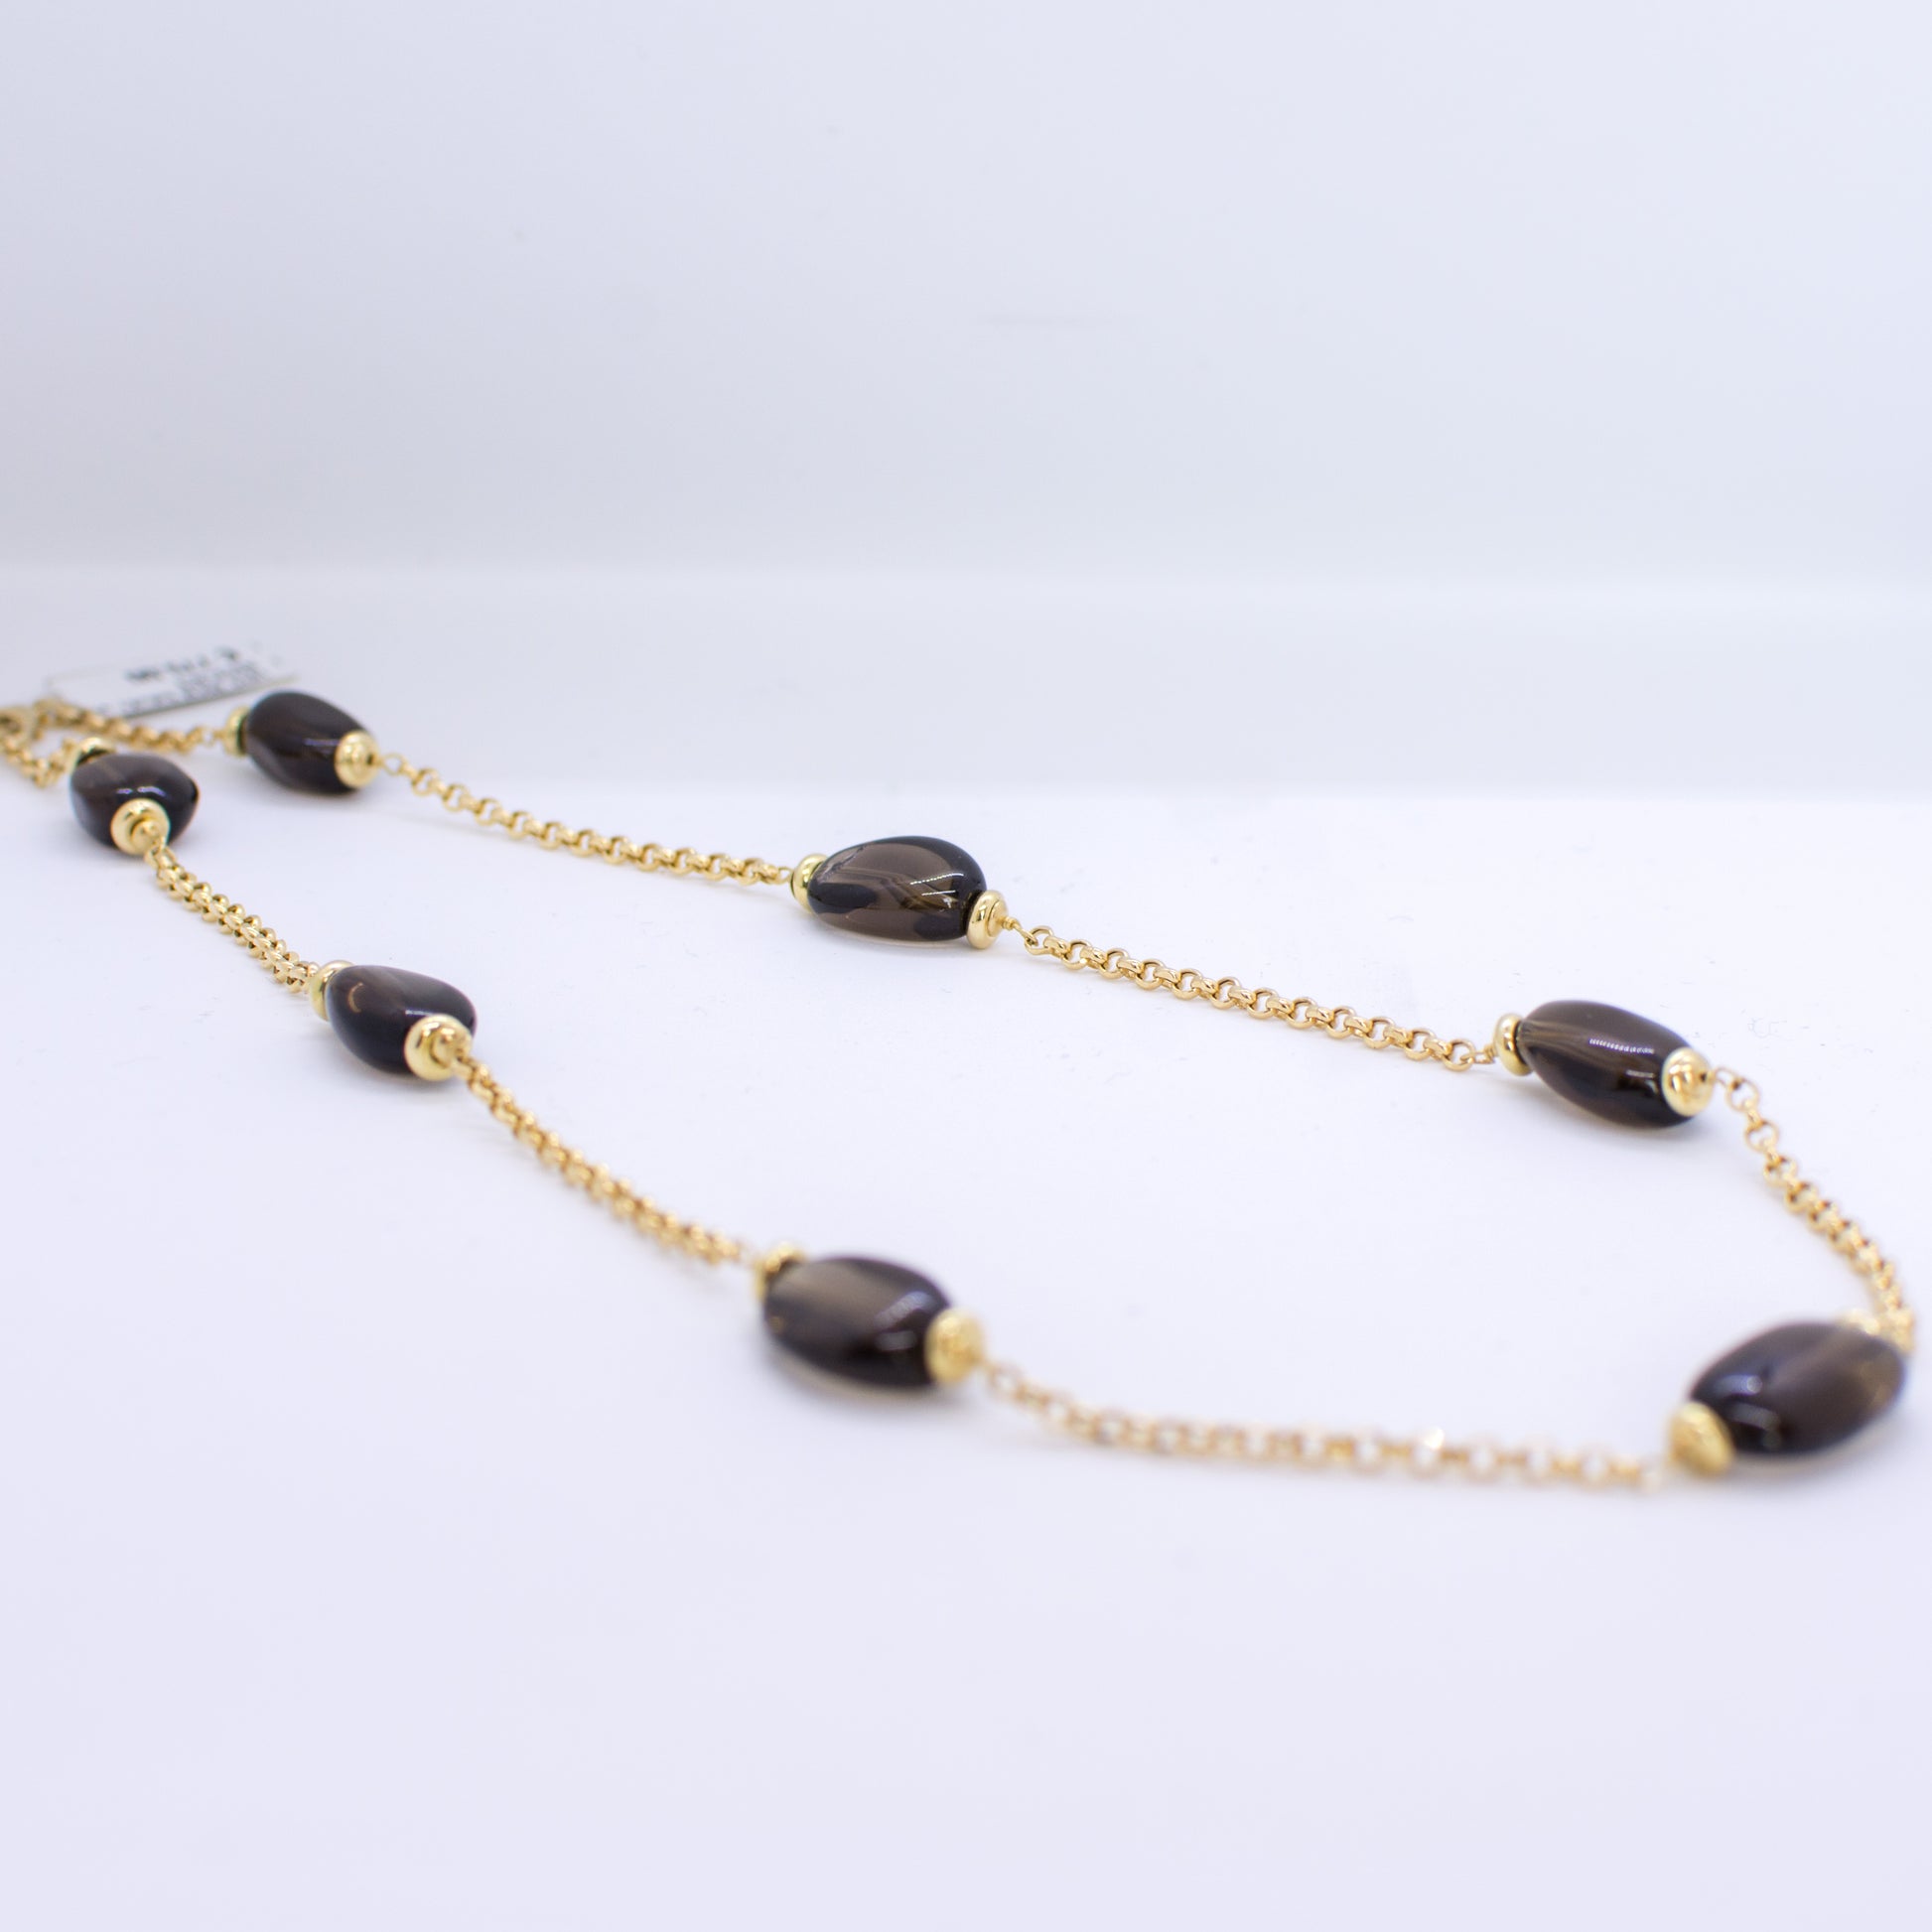 18ct Gold Smoky Quartz and Chain Necklace Smoky Quartz dimensions: 10mm x 12mm approximately Diamond cut 2mm gauge solid trace chain 45cm long 18ct yellow gold This item can be ordered in a variety of lengths.  Please contact us for custom requirements.